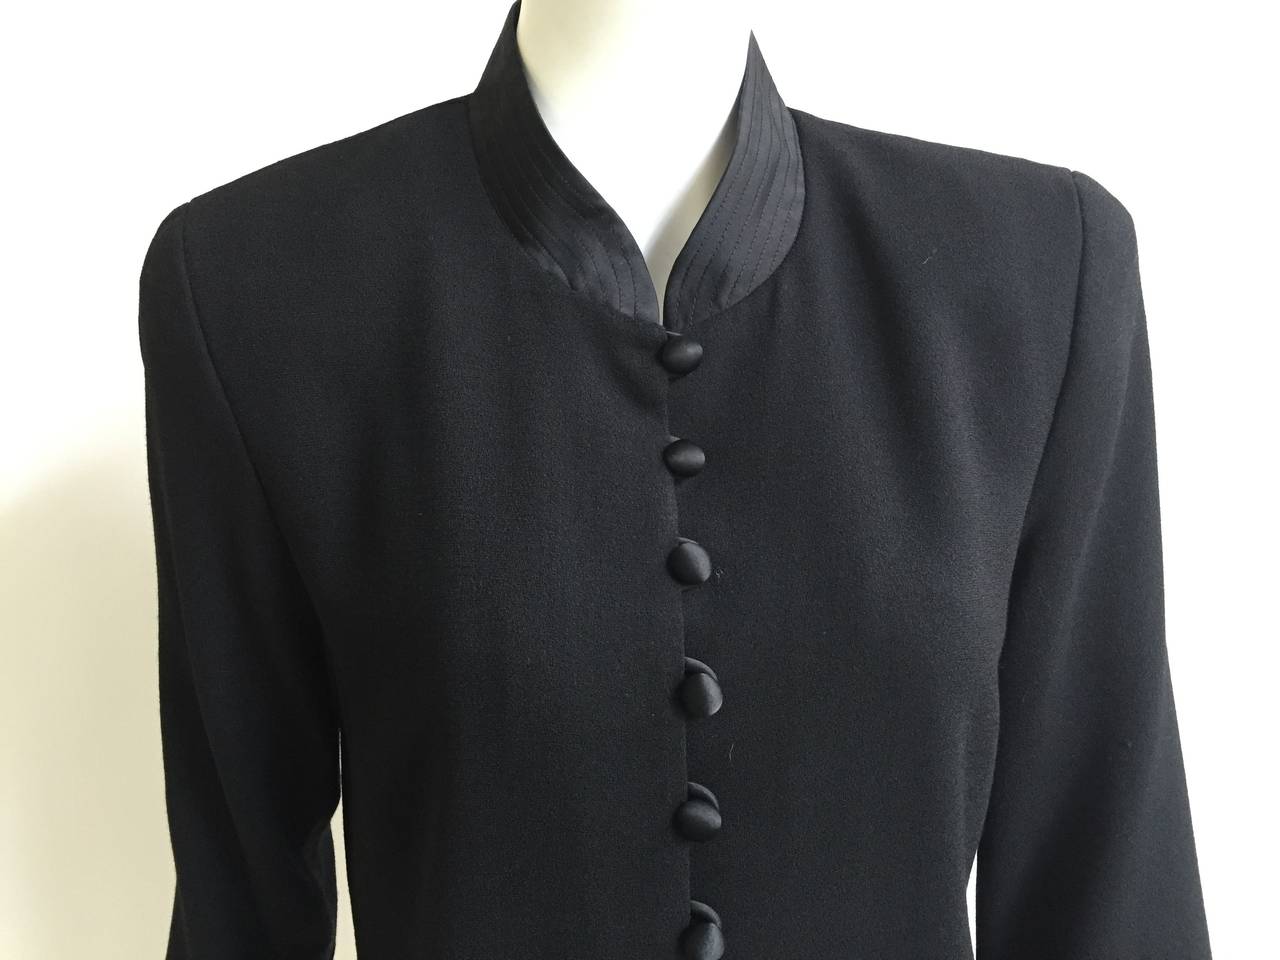 Scaasi 1980s long black wool jacket with quilted sleeve cuffs and collar is a size 10. Jacket is lined and made in the USA. This long black jacket would work perfectly with any of your vintage tuxedo pants for that well polished look.
Measurements